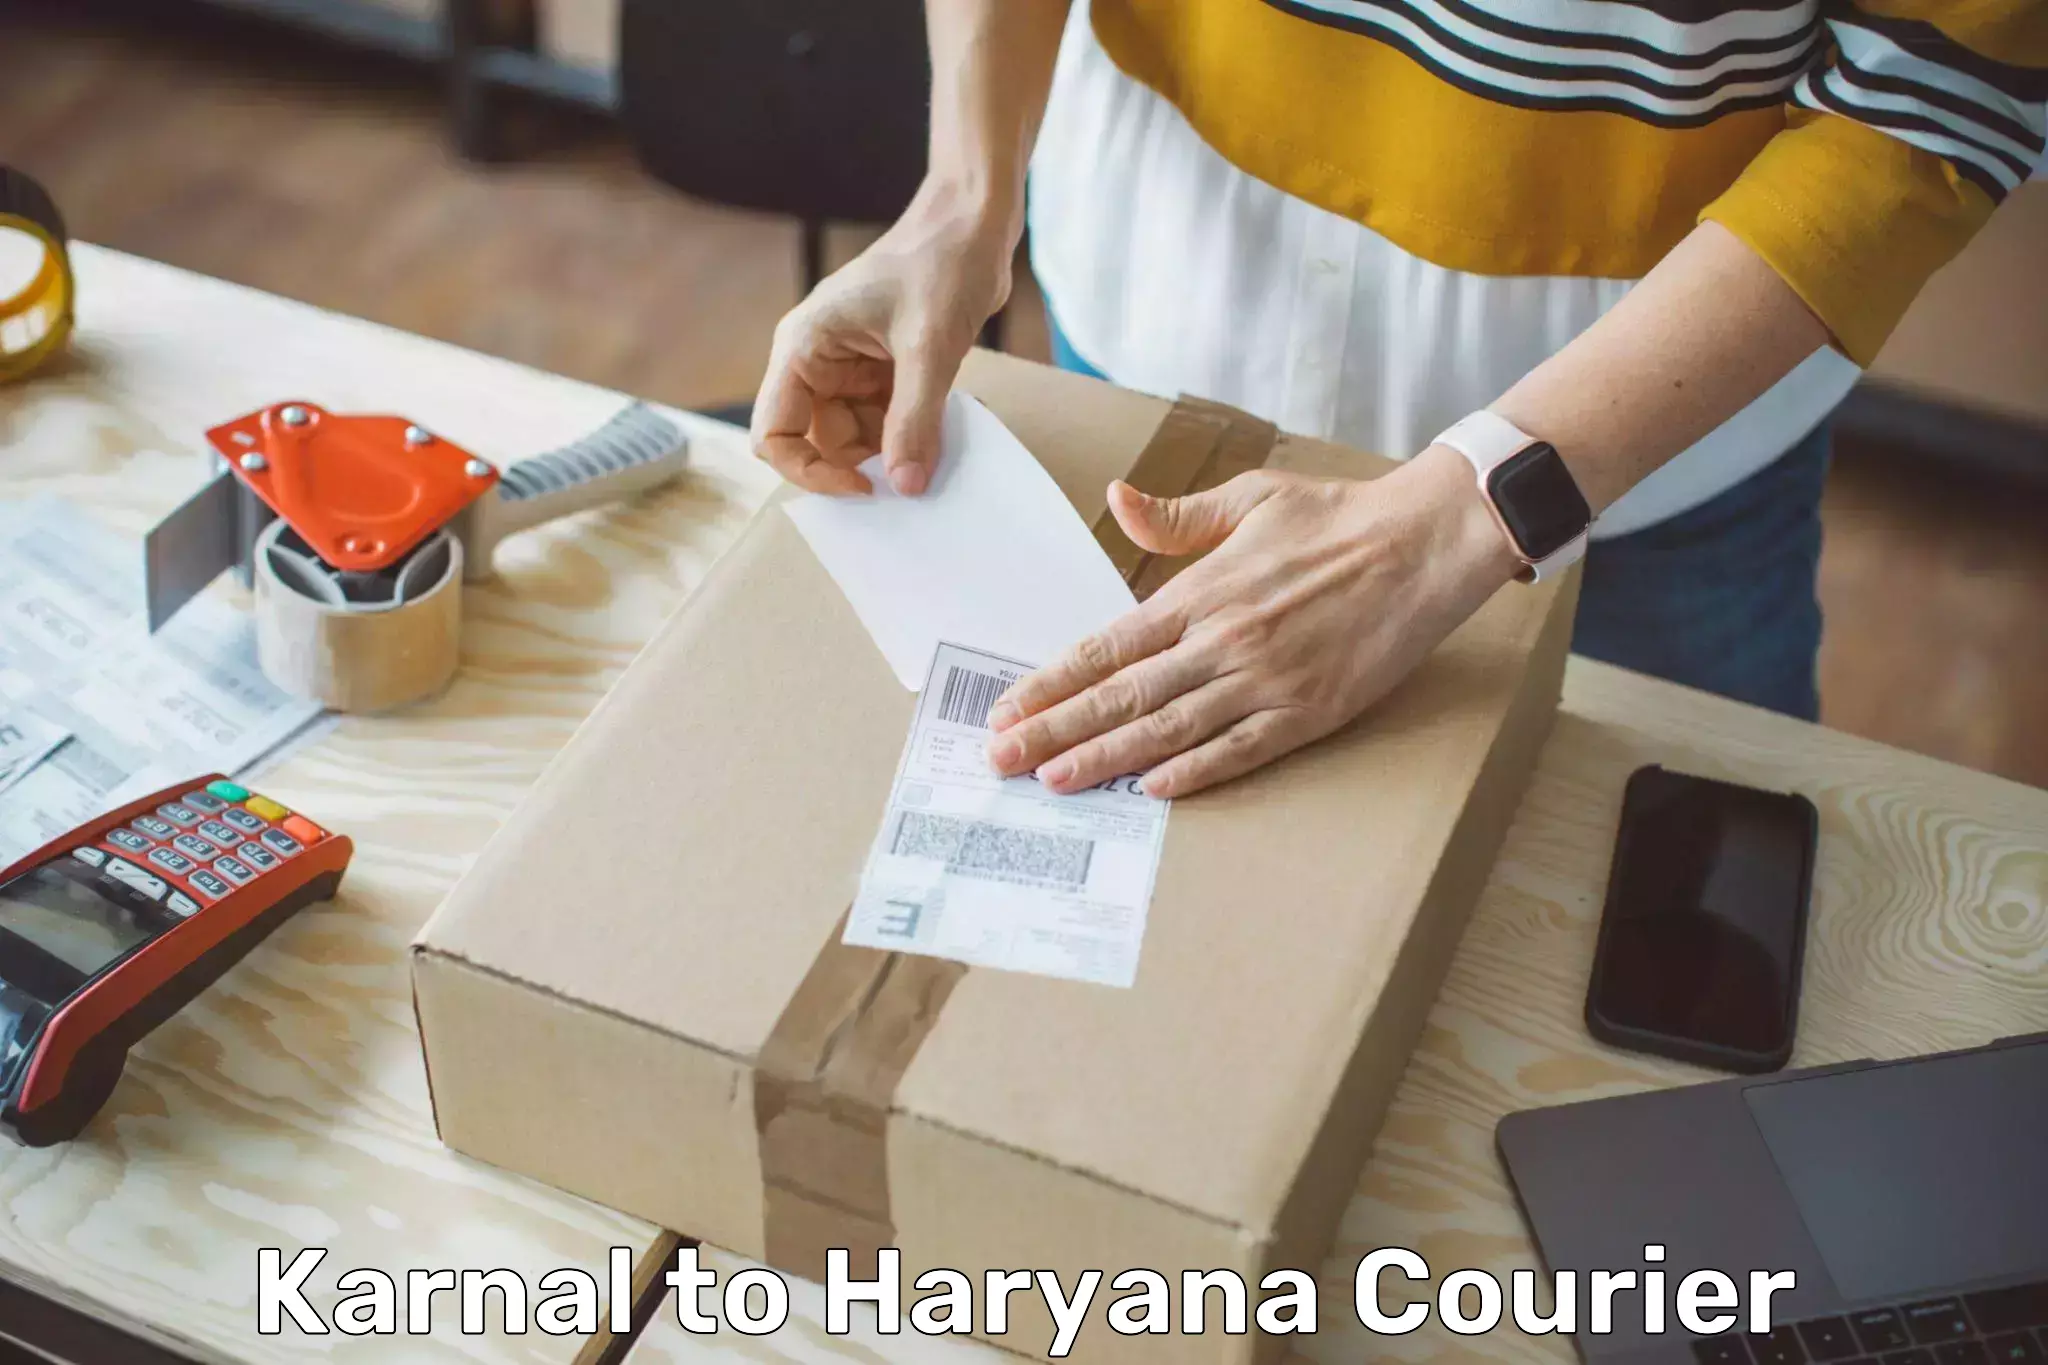 Tailored delivery services Karnal to NCR Haryana